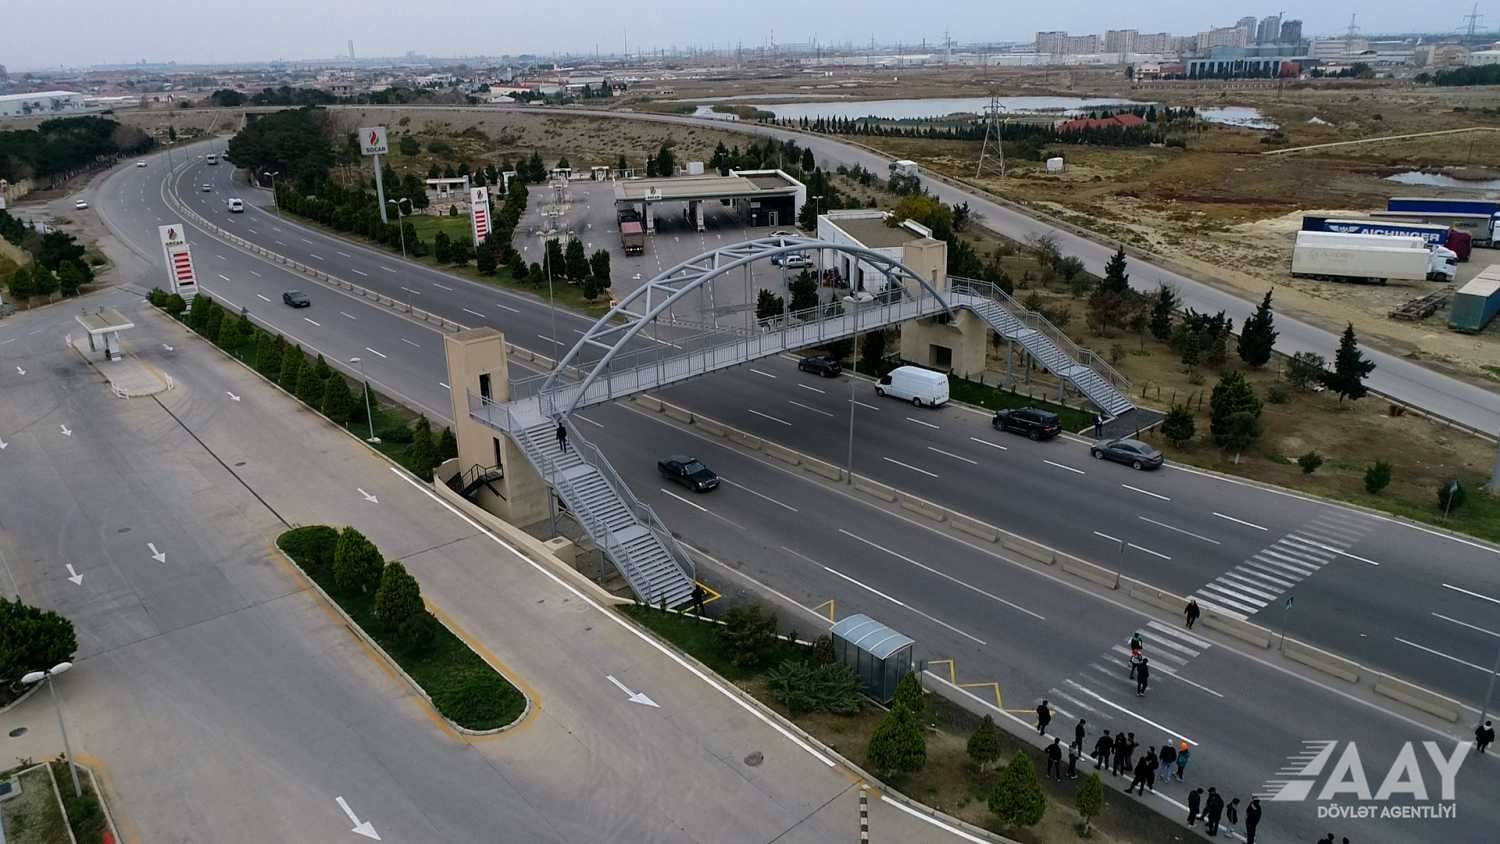 New pedestrian crossing commissioned to citizens [PHOTOS\VIDEO]